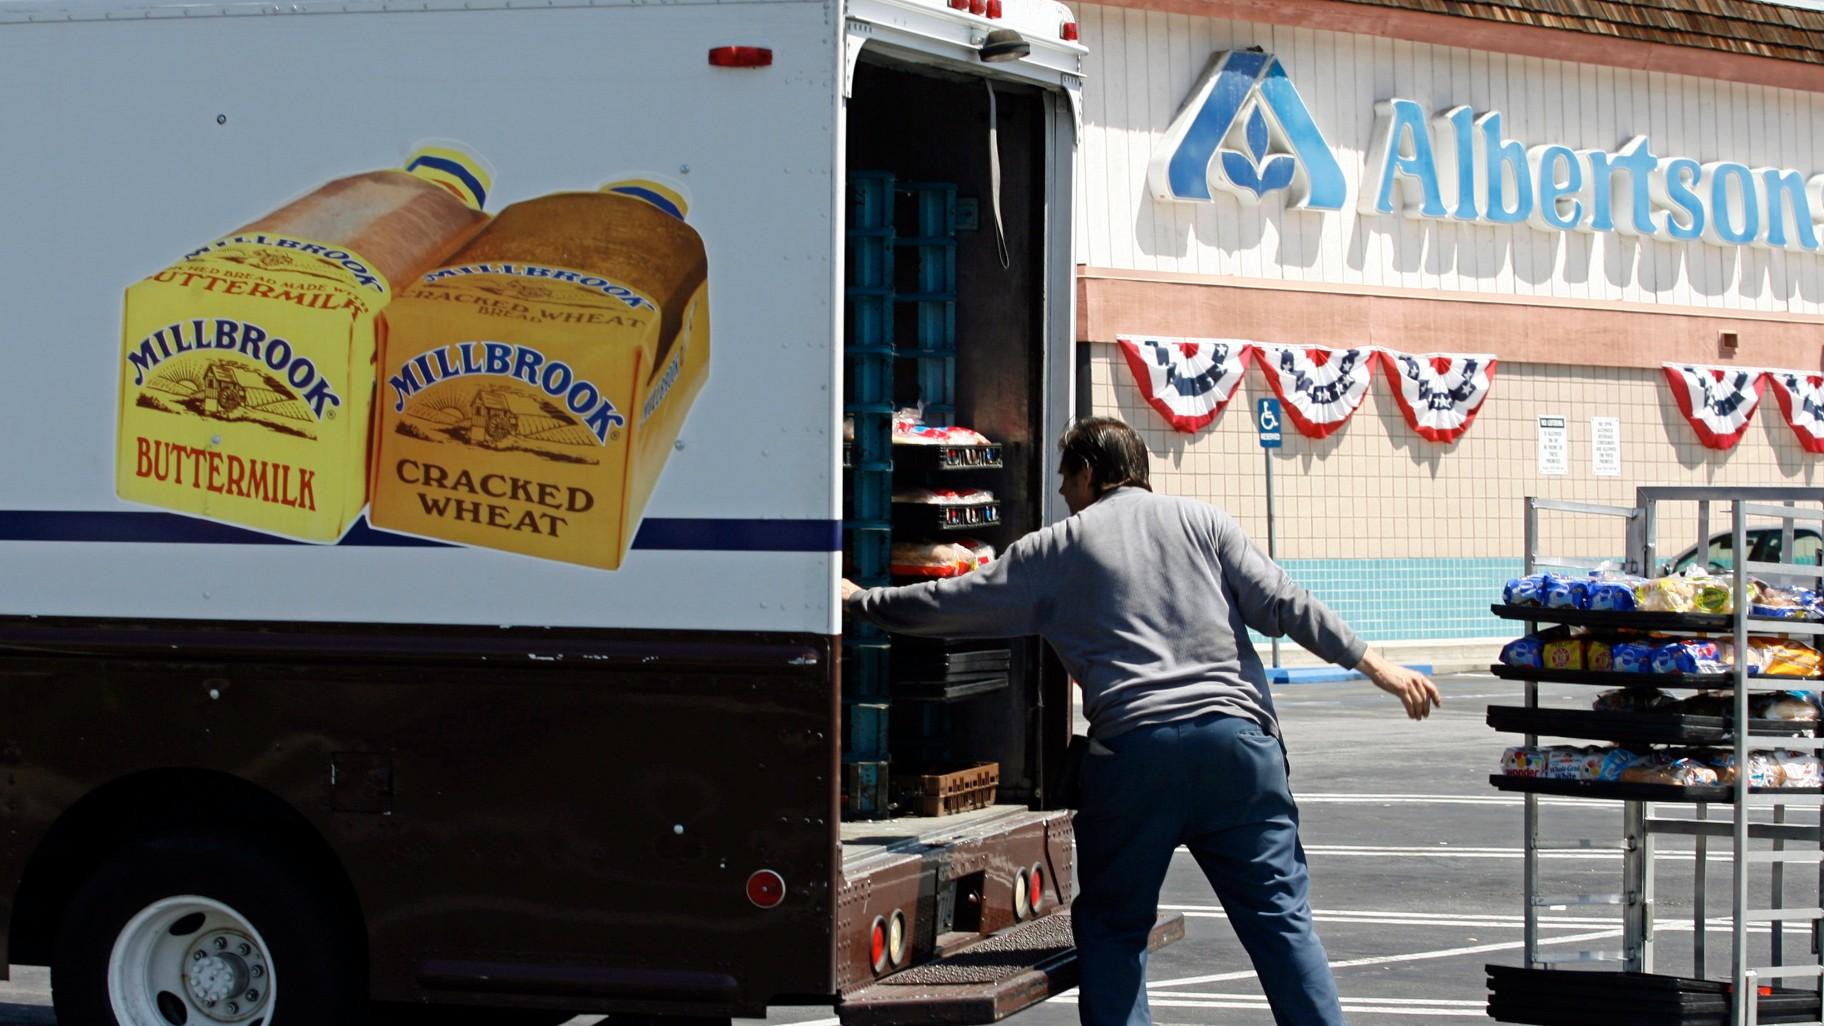 Mitch Maddox, a bread route salesman, loads bread Tuesday, May 30, 2006, outside the Eagle Rock Albertsons store in Los Angeles. (AP Photo / Damian Dovarganes, File)